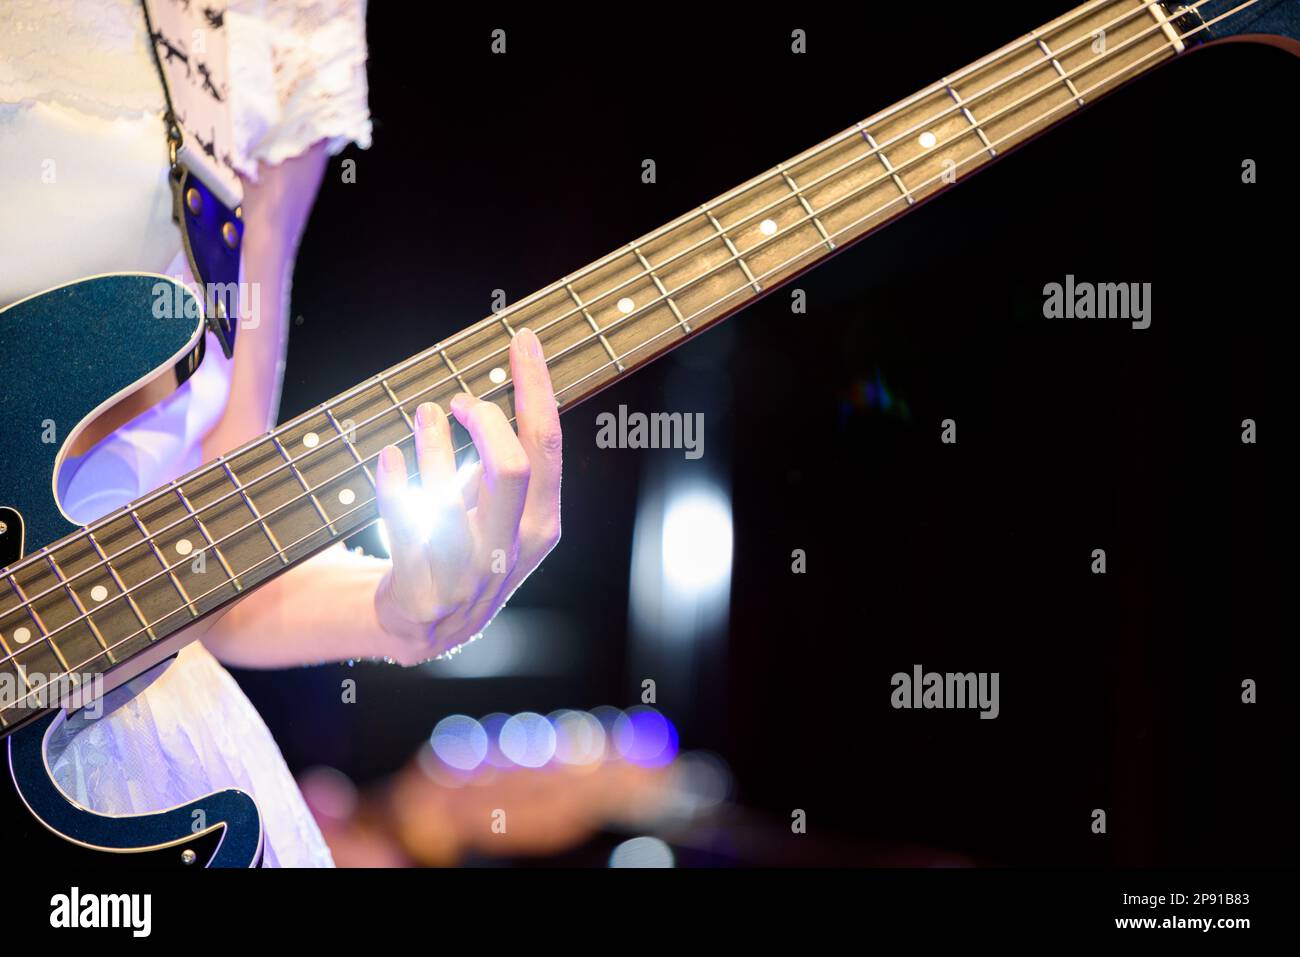 Female musician in a white dress playing electric bass guitar. Hand close-up. Stock Photo